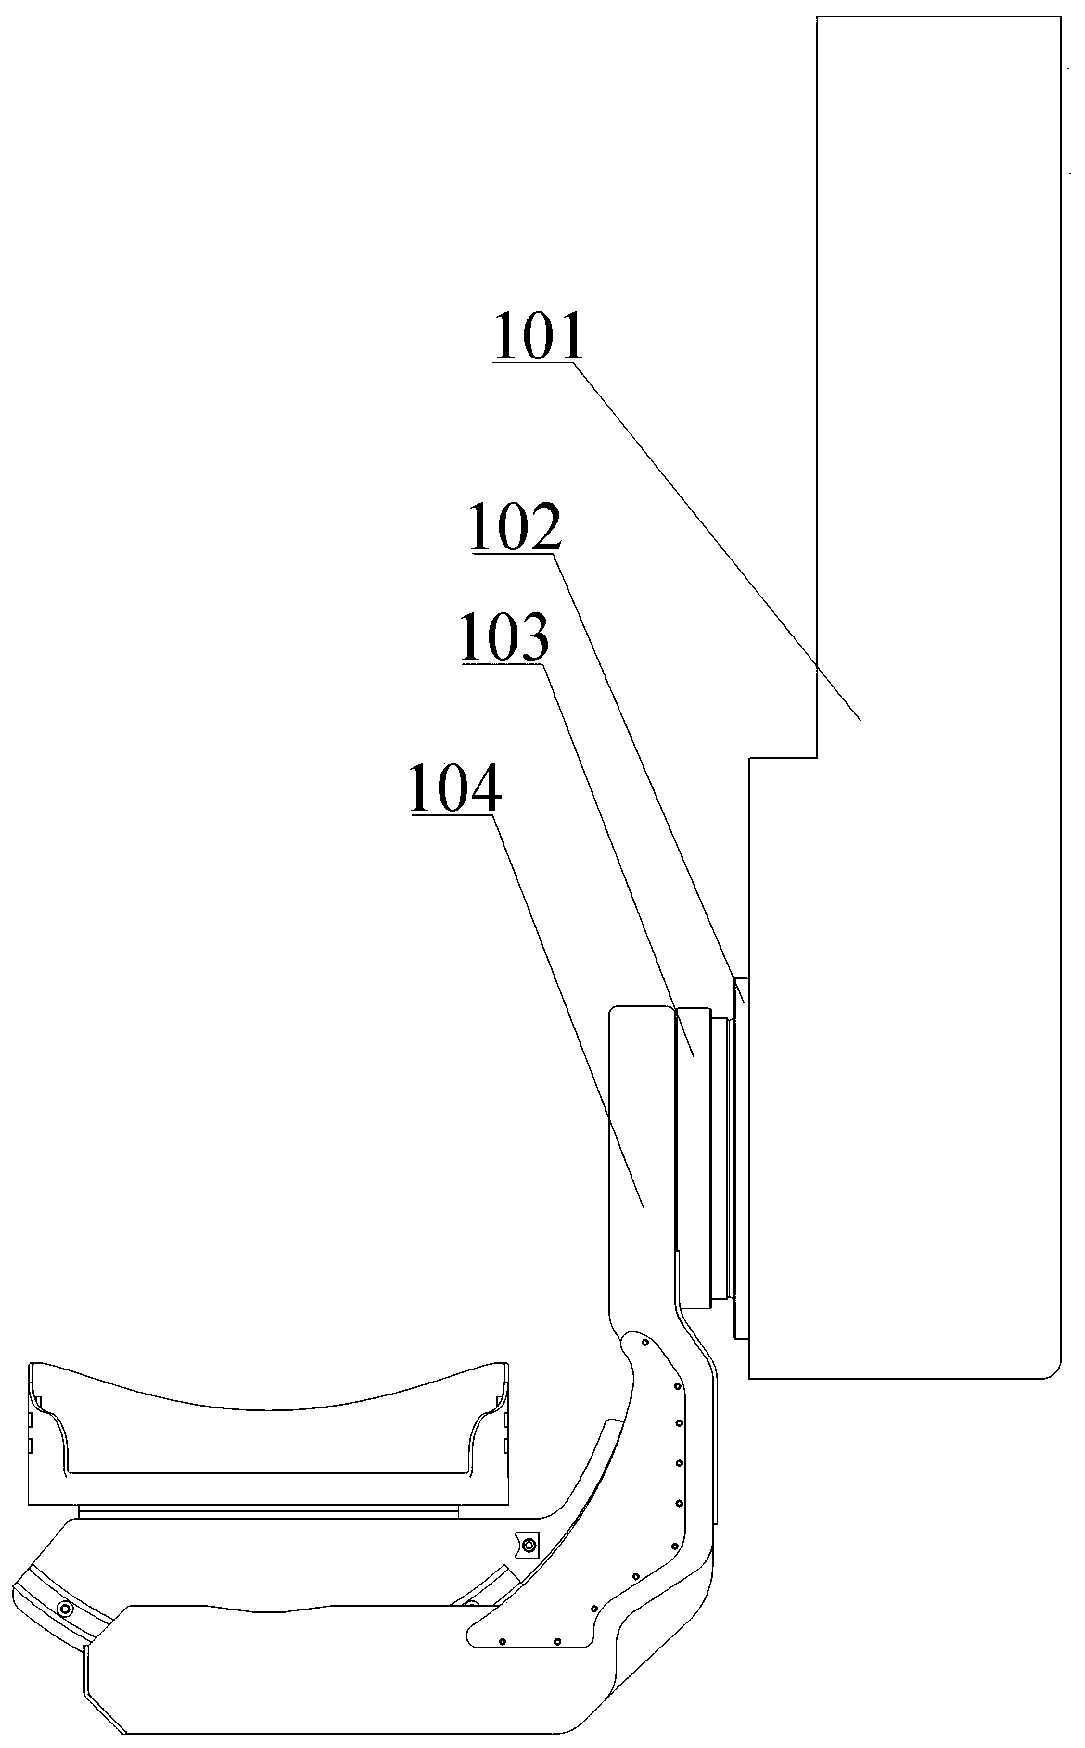 Three-degree-of-freedom ankle joint rehabilitation device